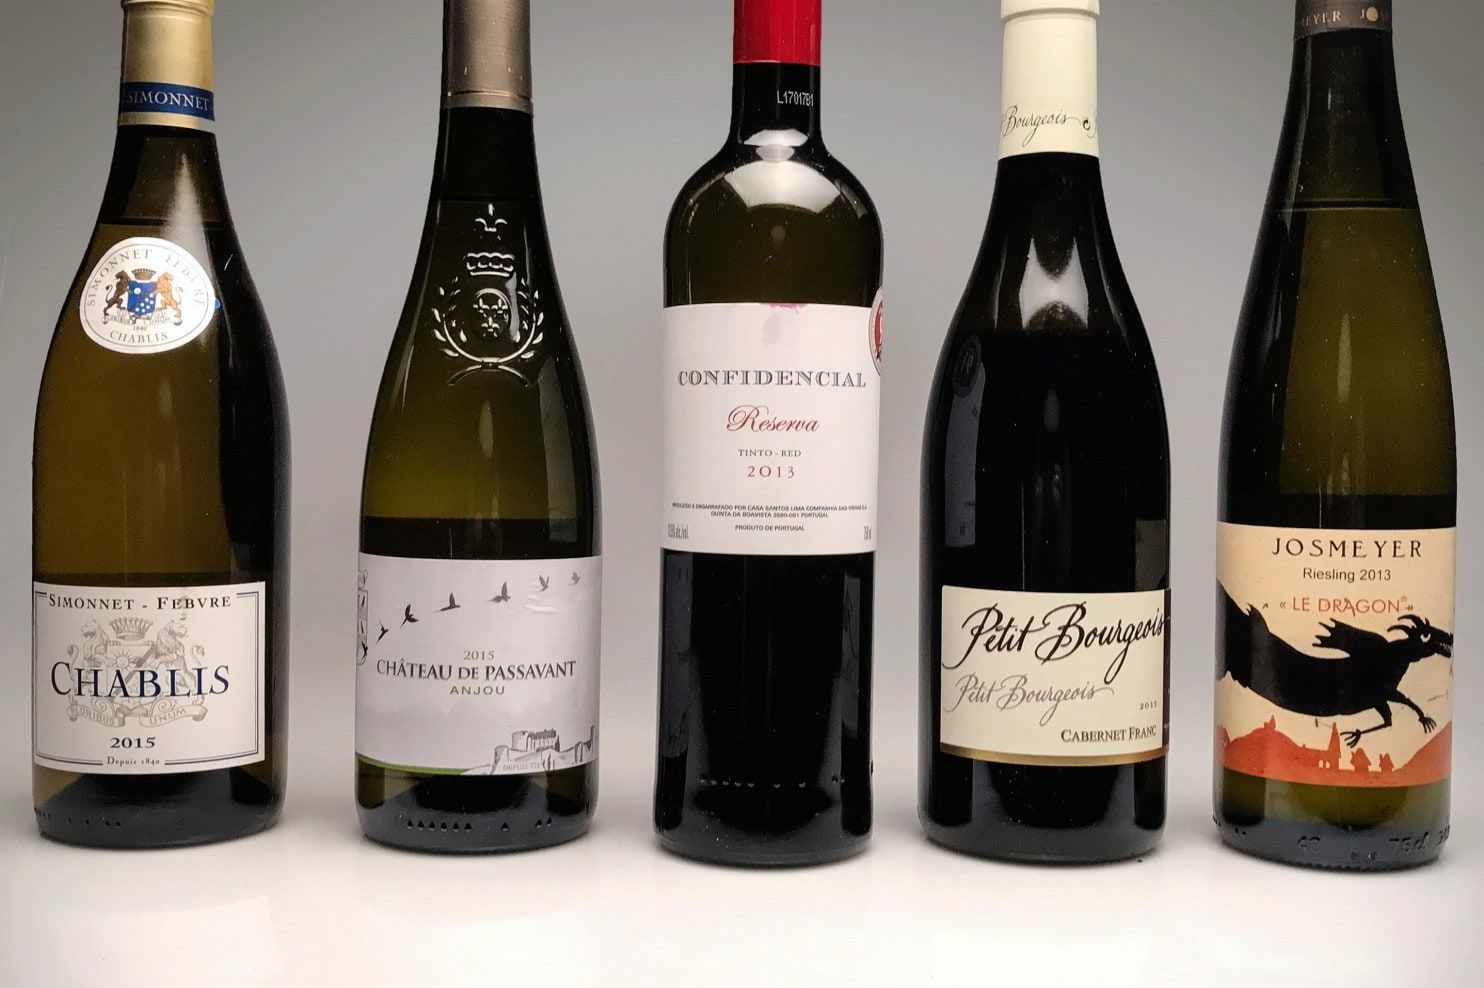 5 wines to round out your summer and bring on Labor Day